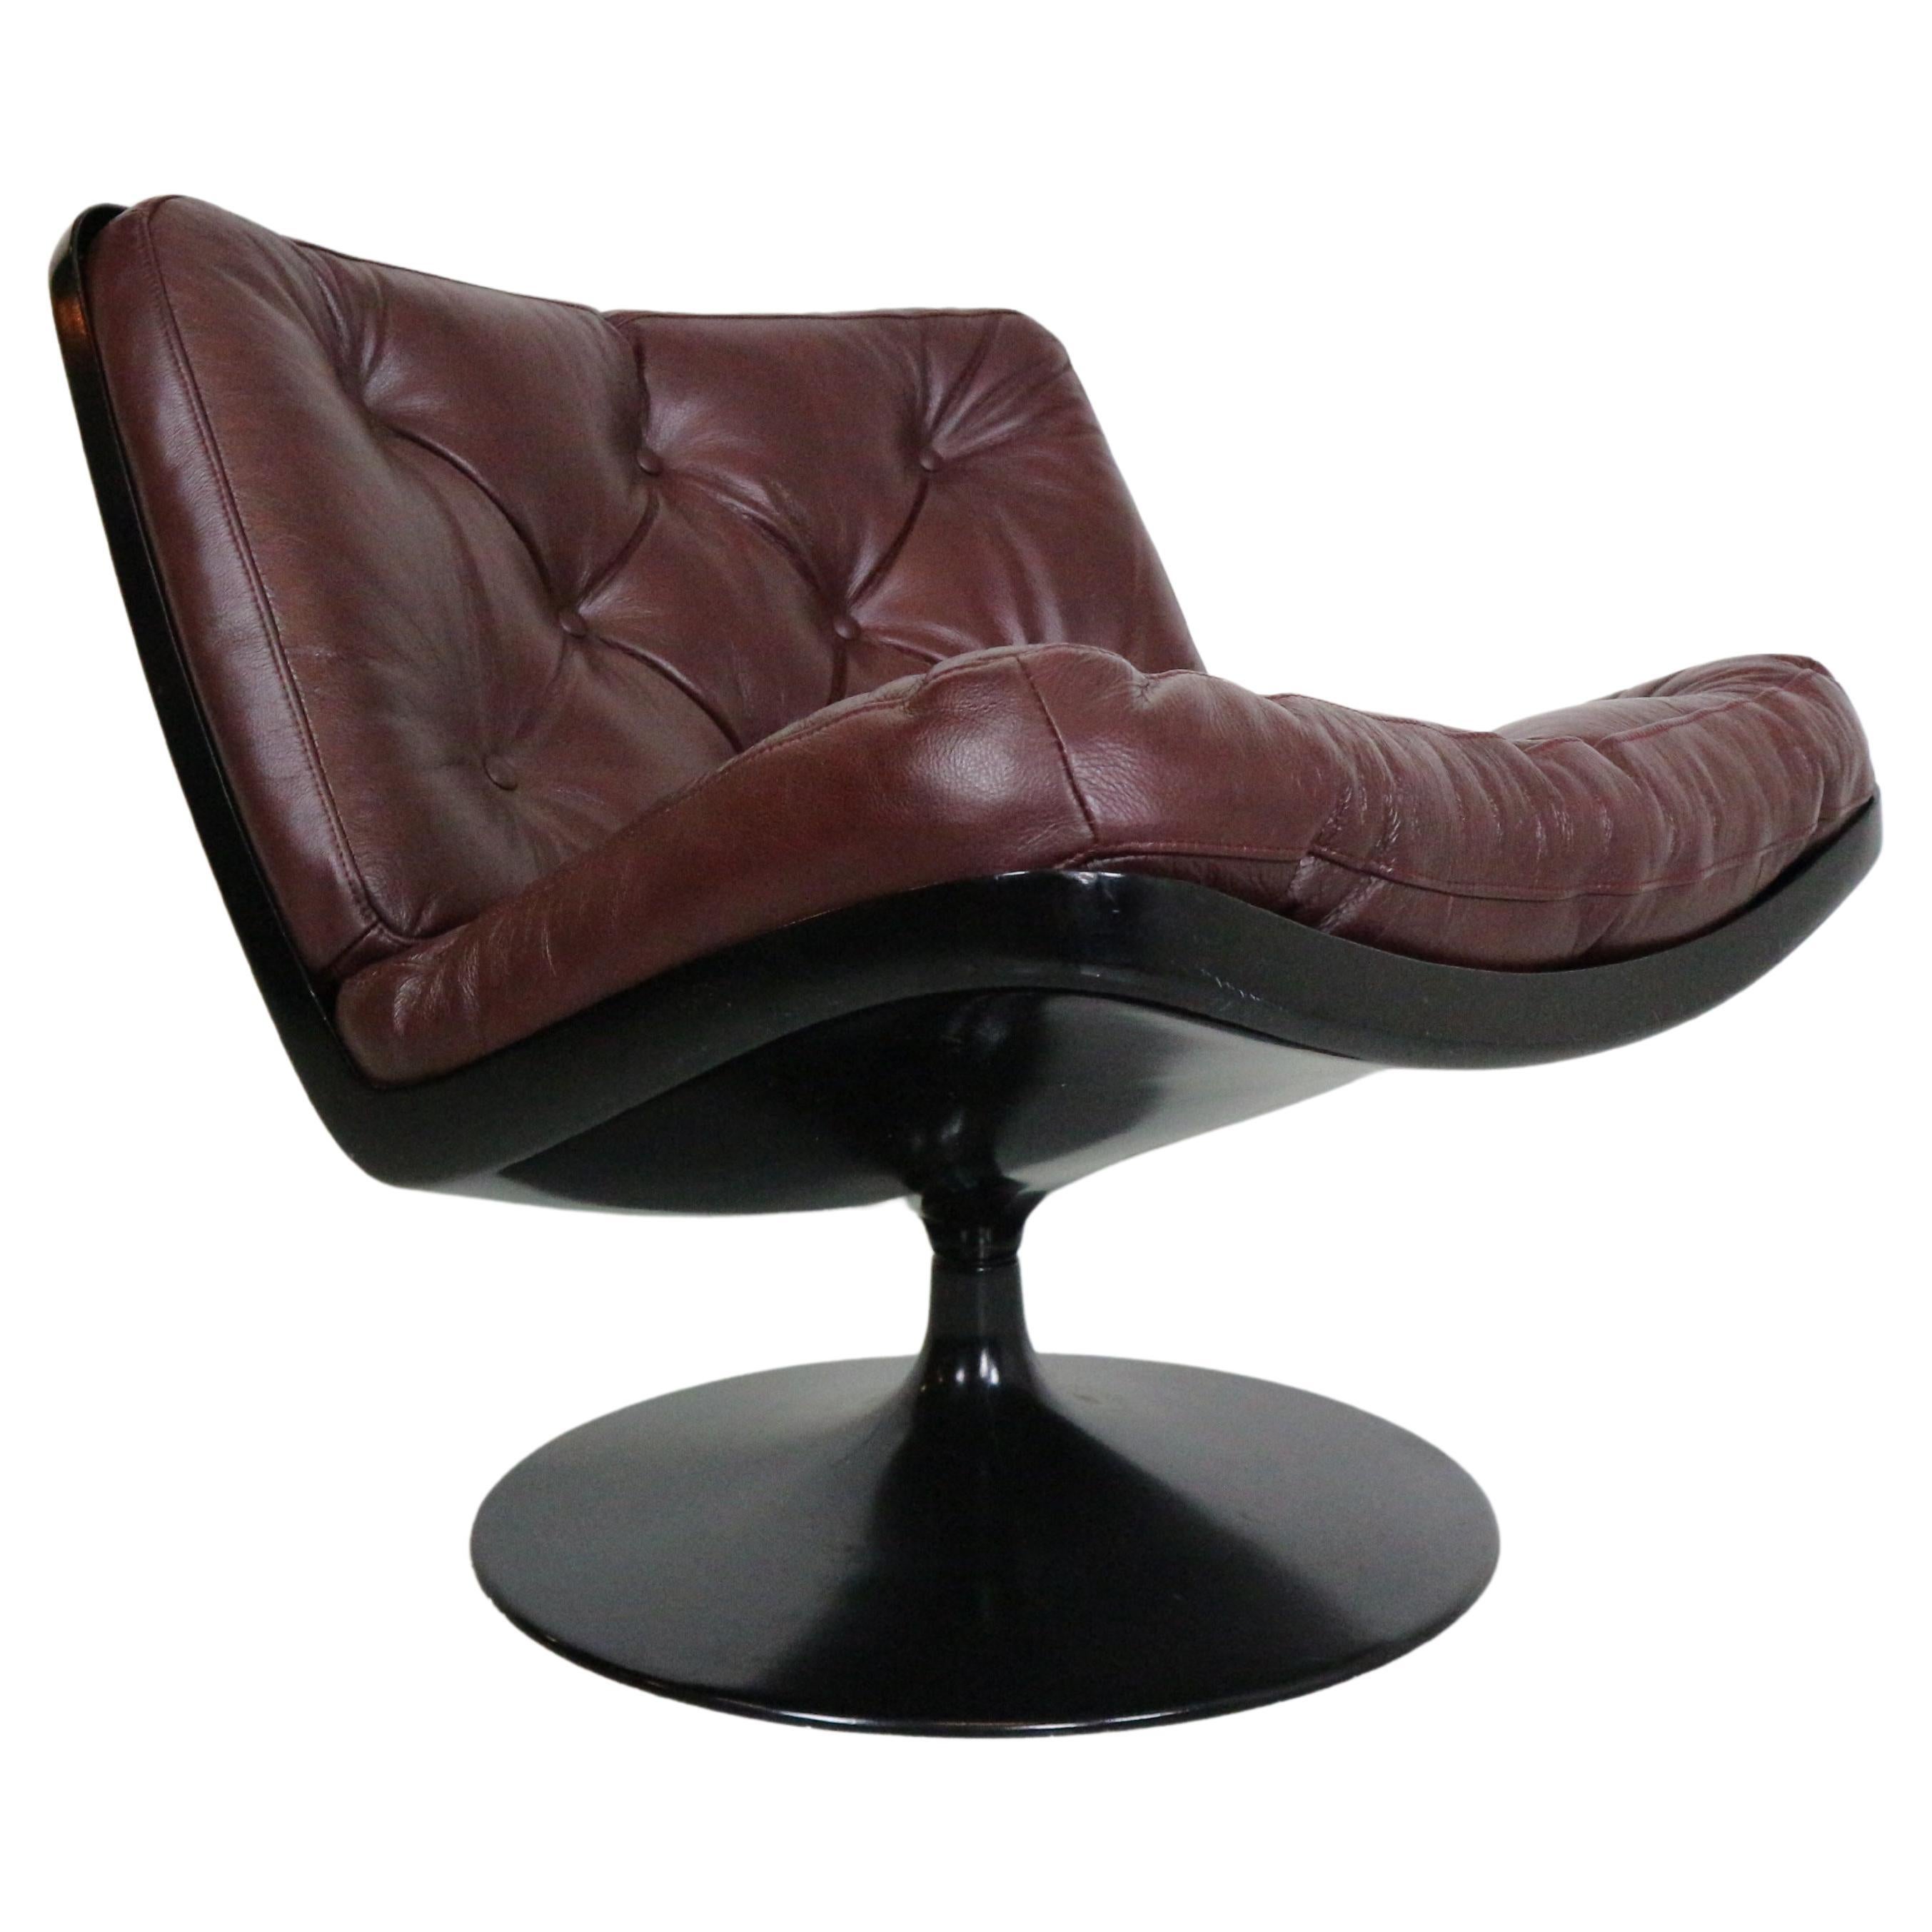 Geoffrey Harcourt Swivel Leather Lounge Chair- "F504" for Artifort, 1960's